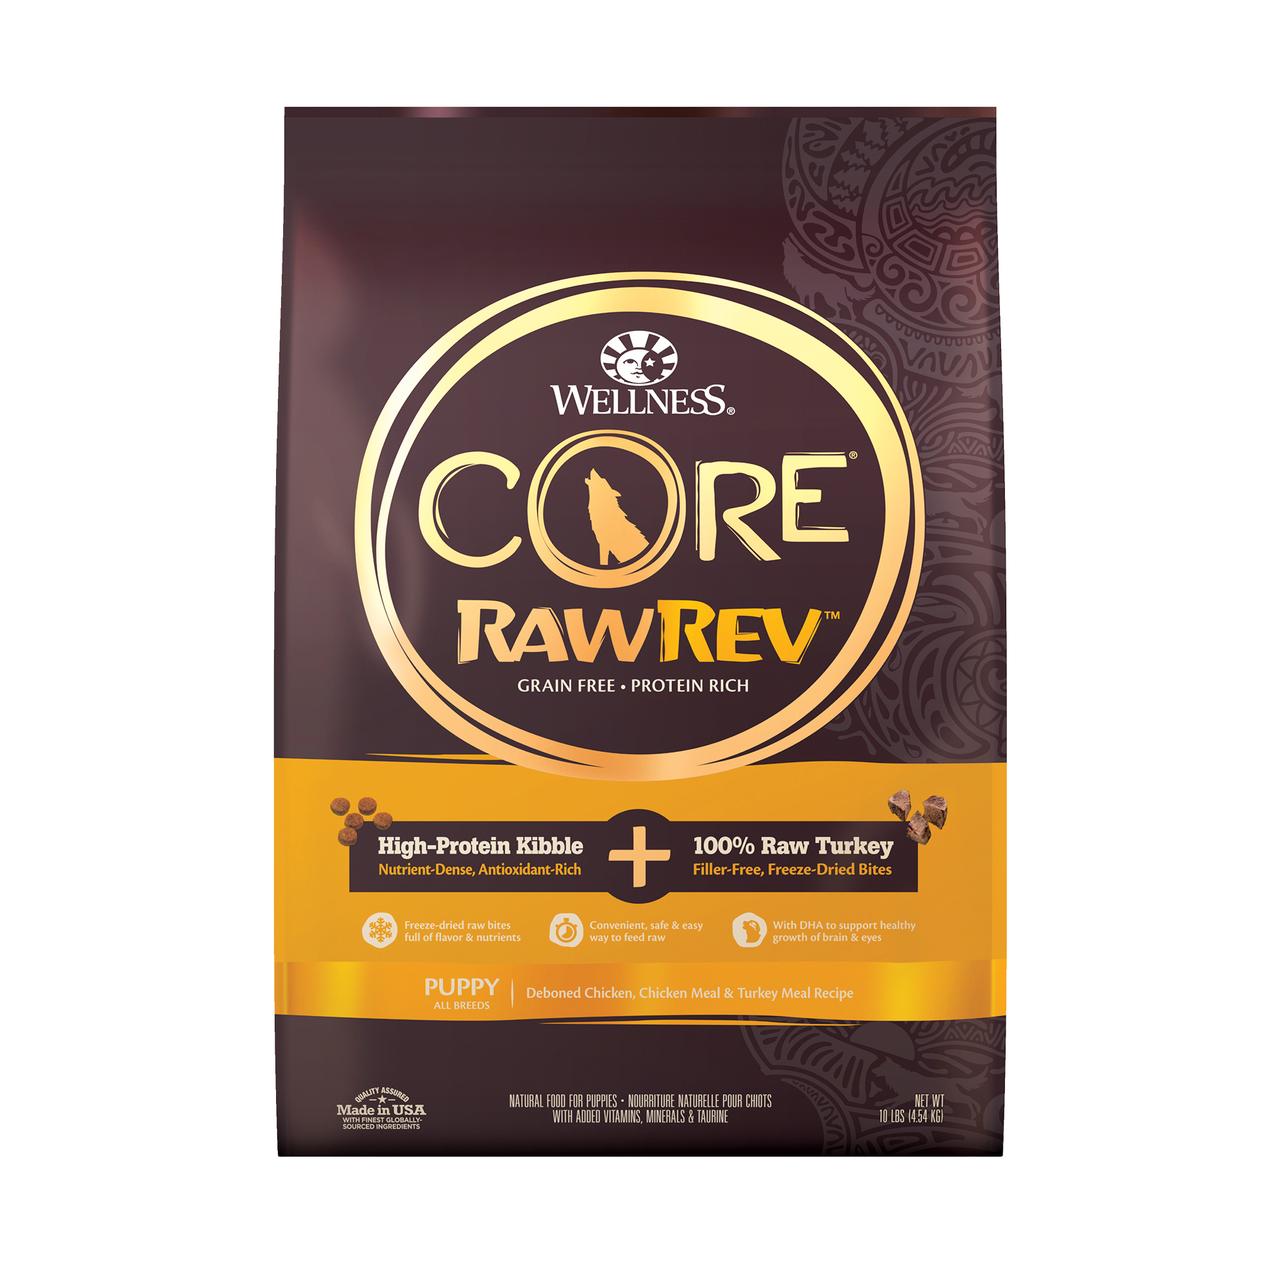 Wellness CORE RawRev Grain Free Natural Puppy Dry Dog Food, Puppy Recipe with Freeze Dried Turkey, 10lb Bag - image 1 of 8